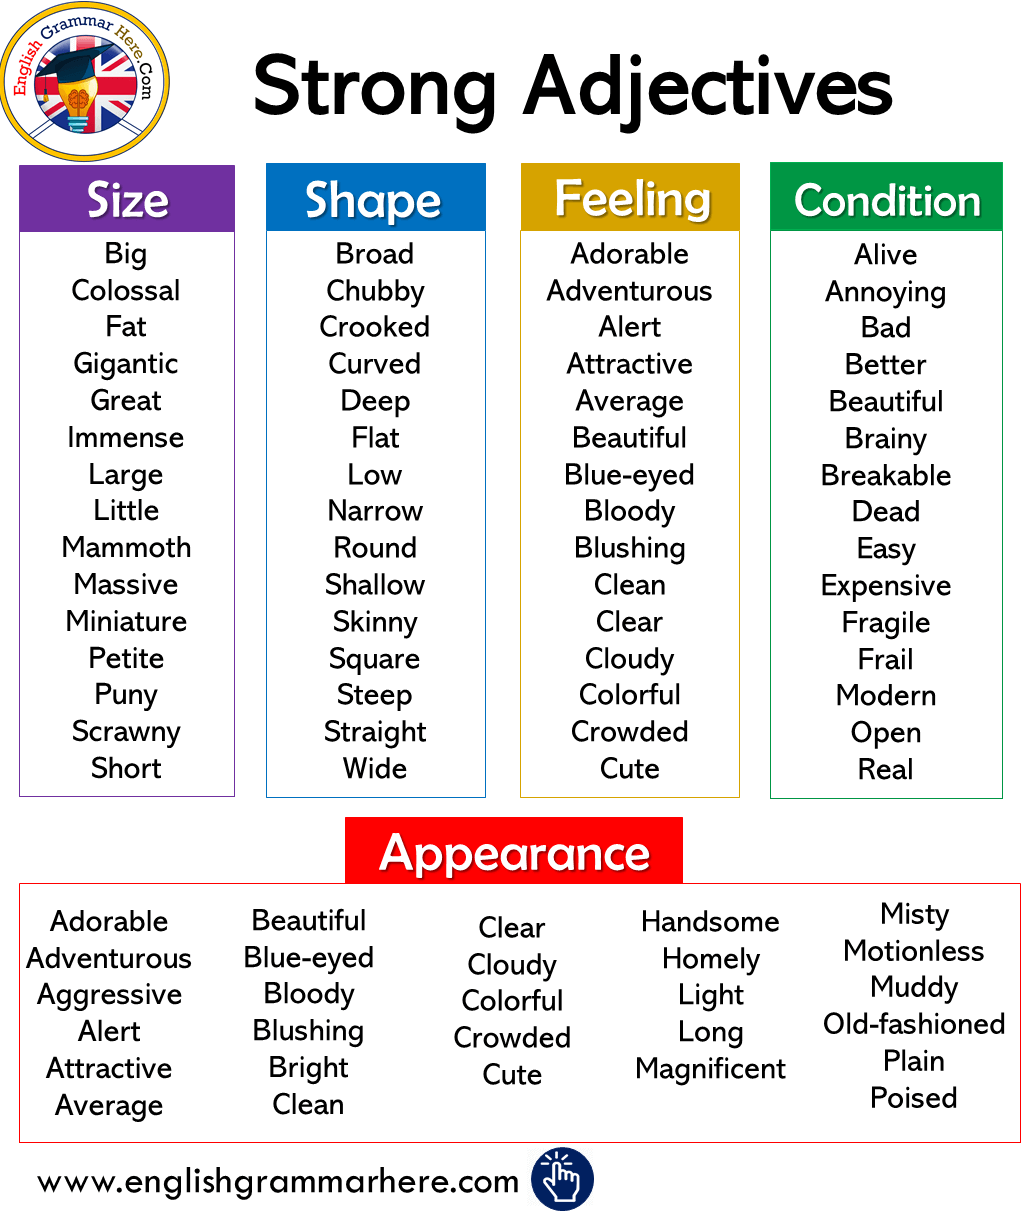 Strong Adjectives in English